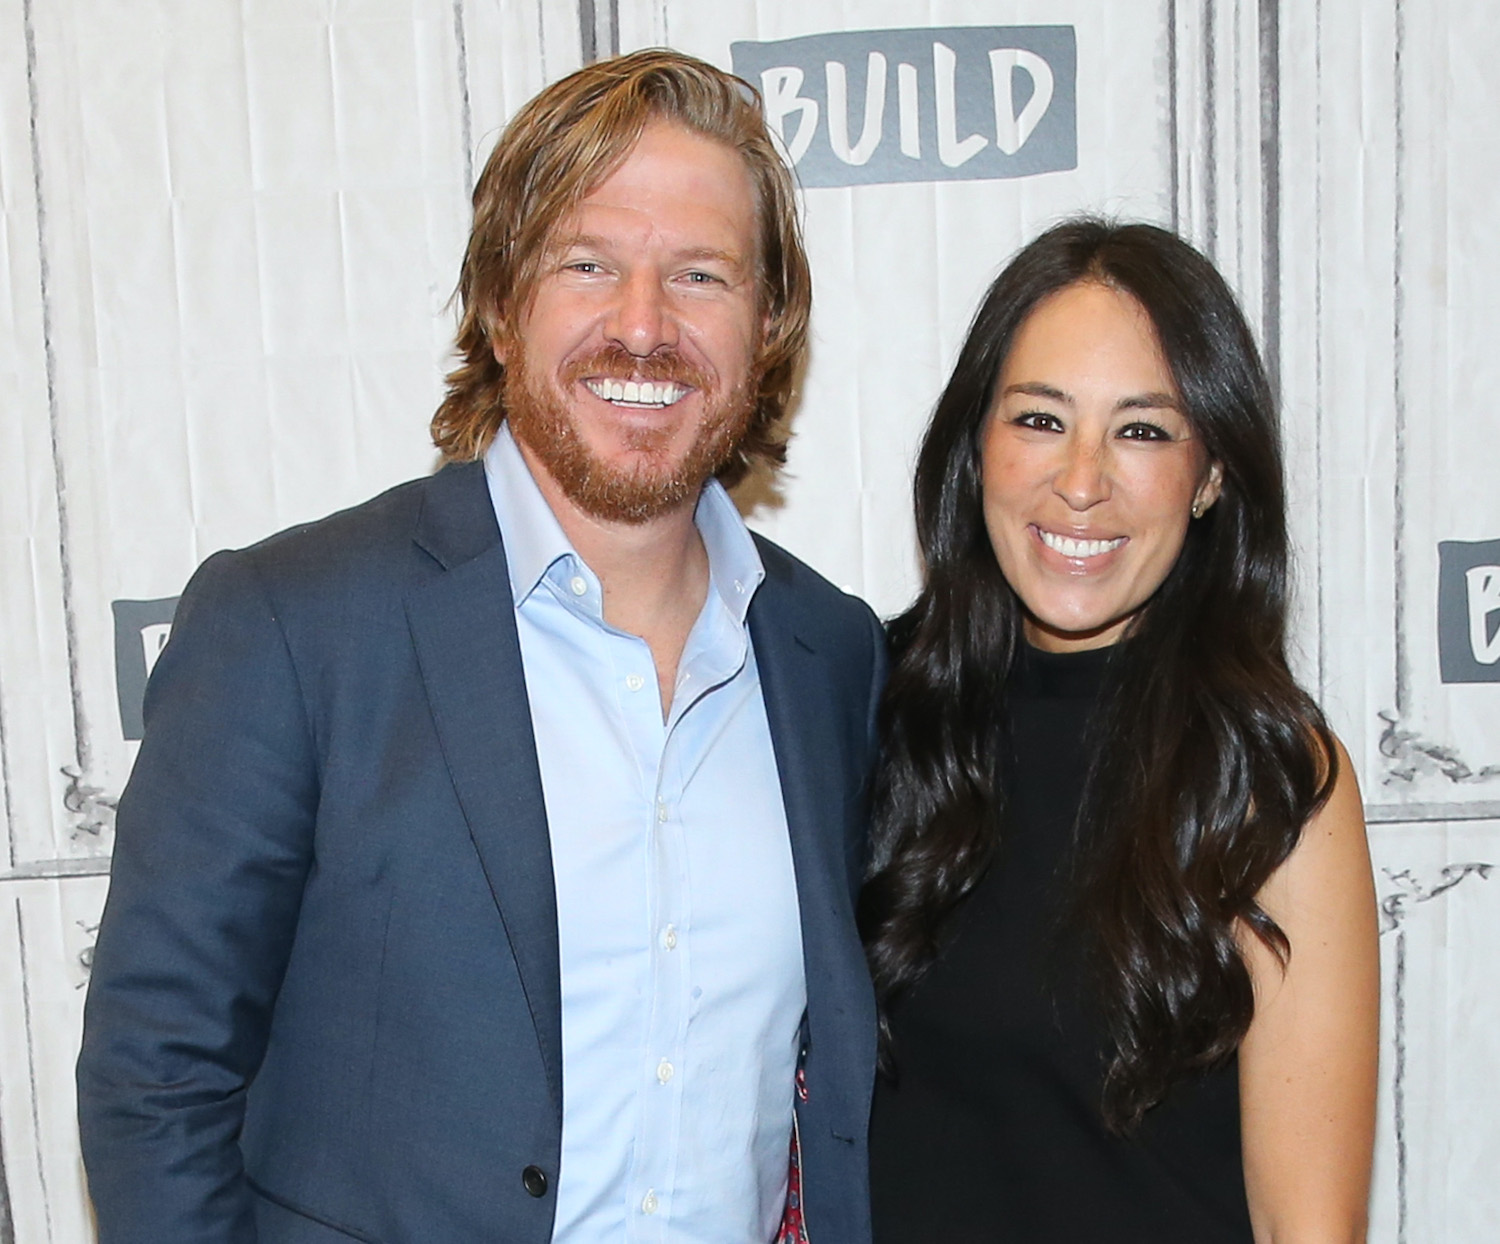 Chip and Joanna Gaines smile at the Build Series at Build Studio, with Chip wearing a sportcoat and Joanna in a black dress